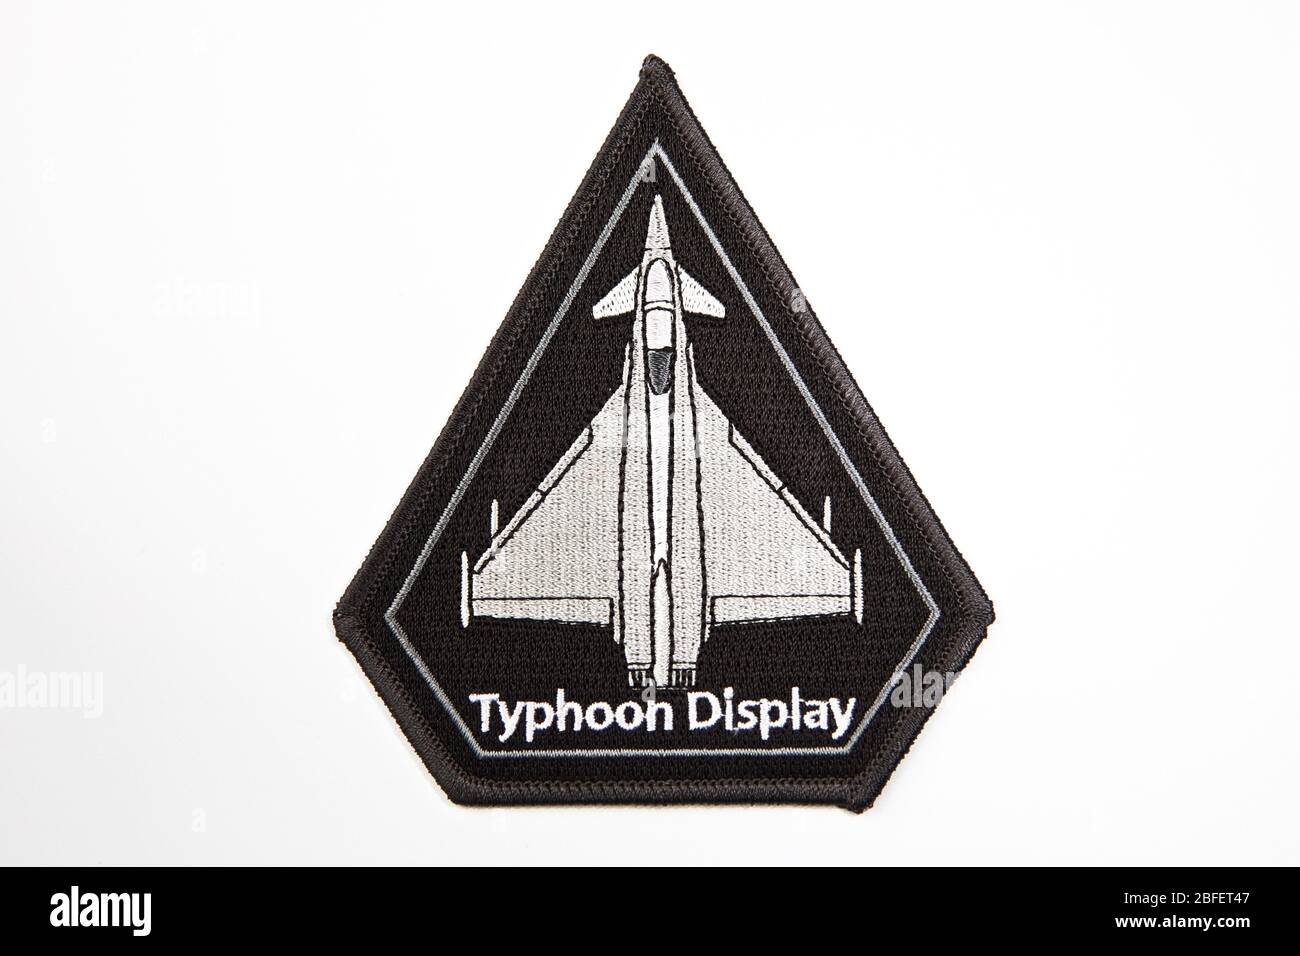 RAF Typhoon Display Team Patch Banque D'Images